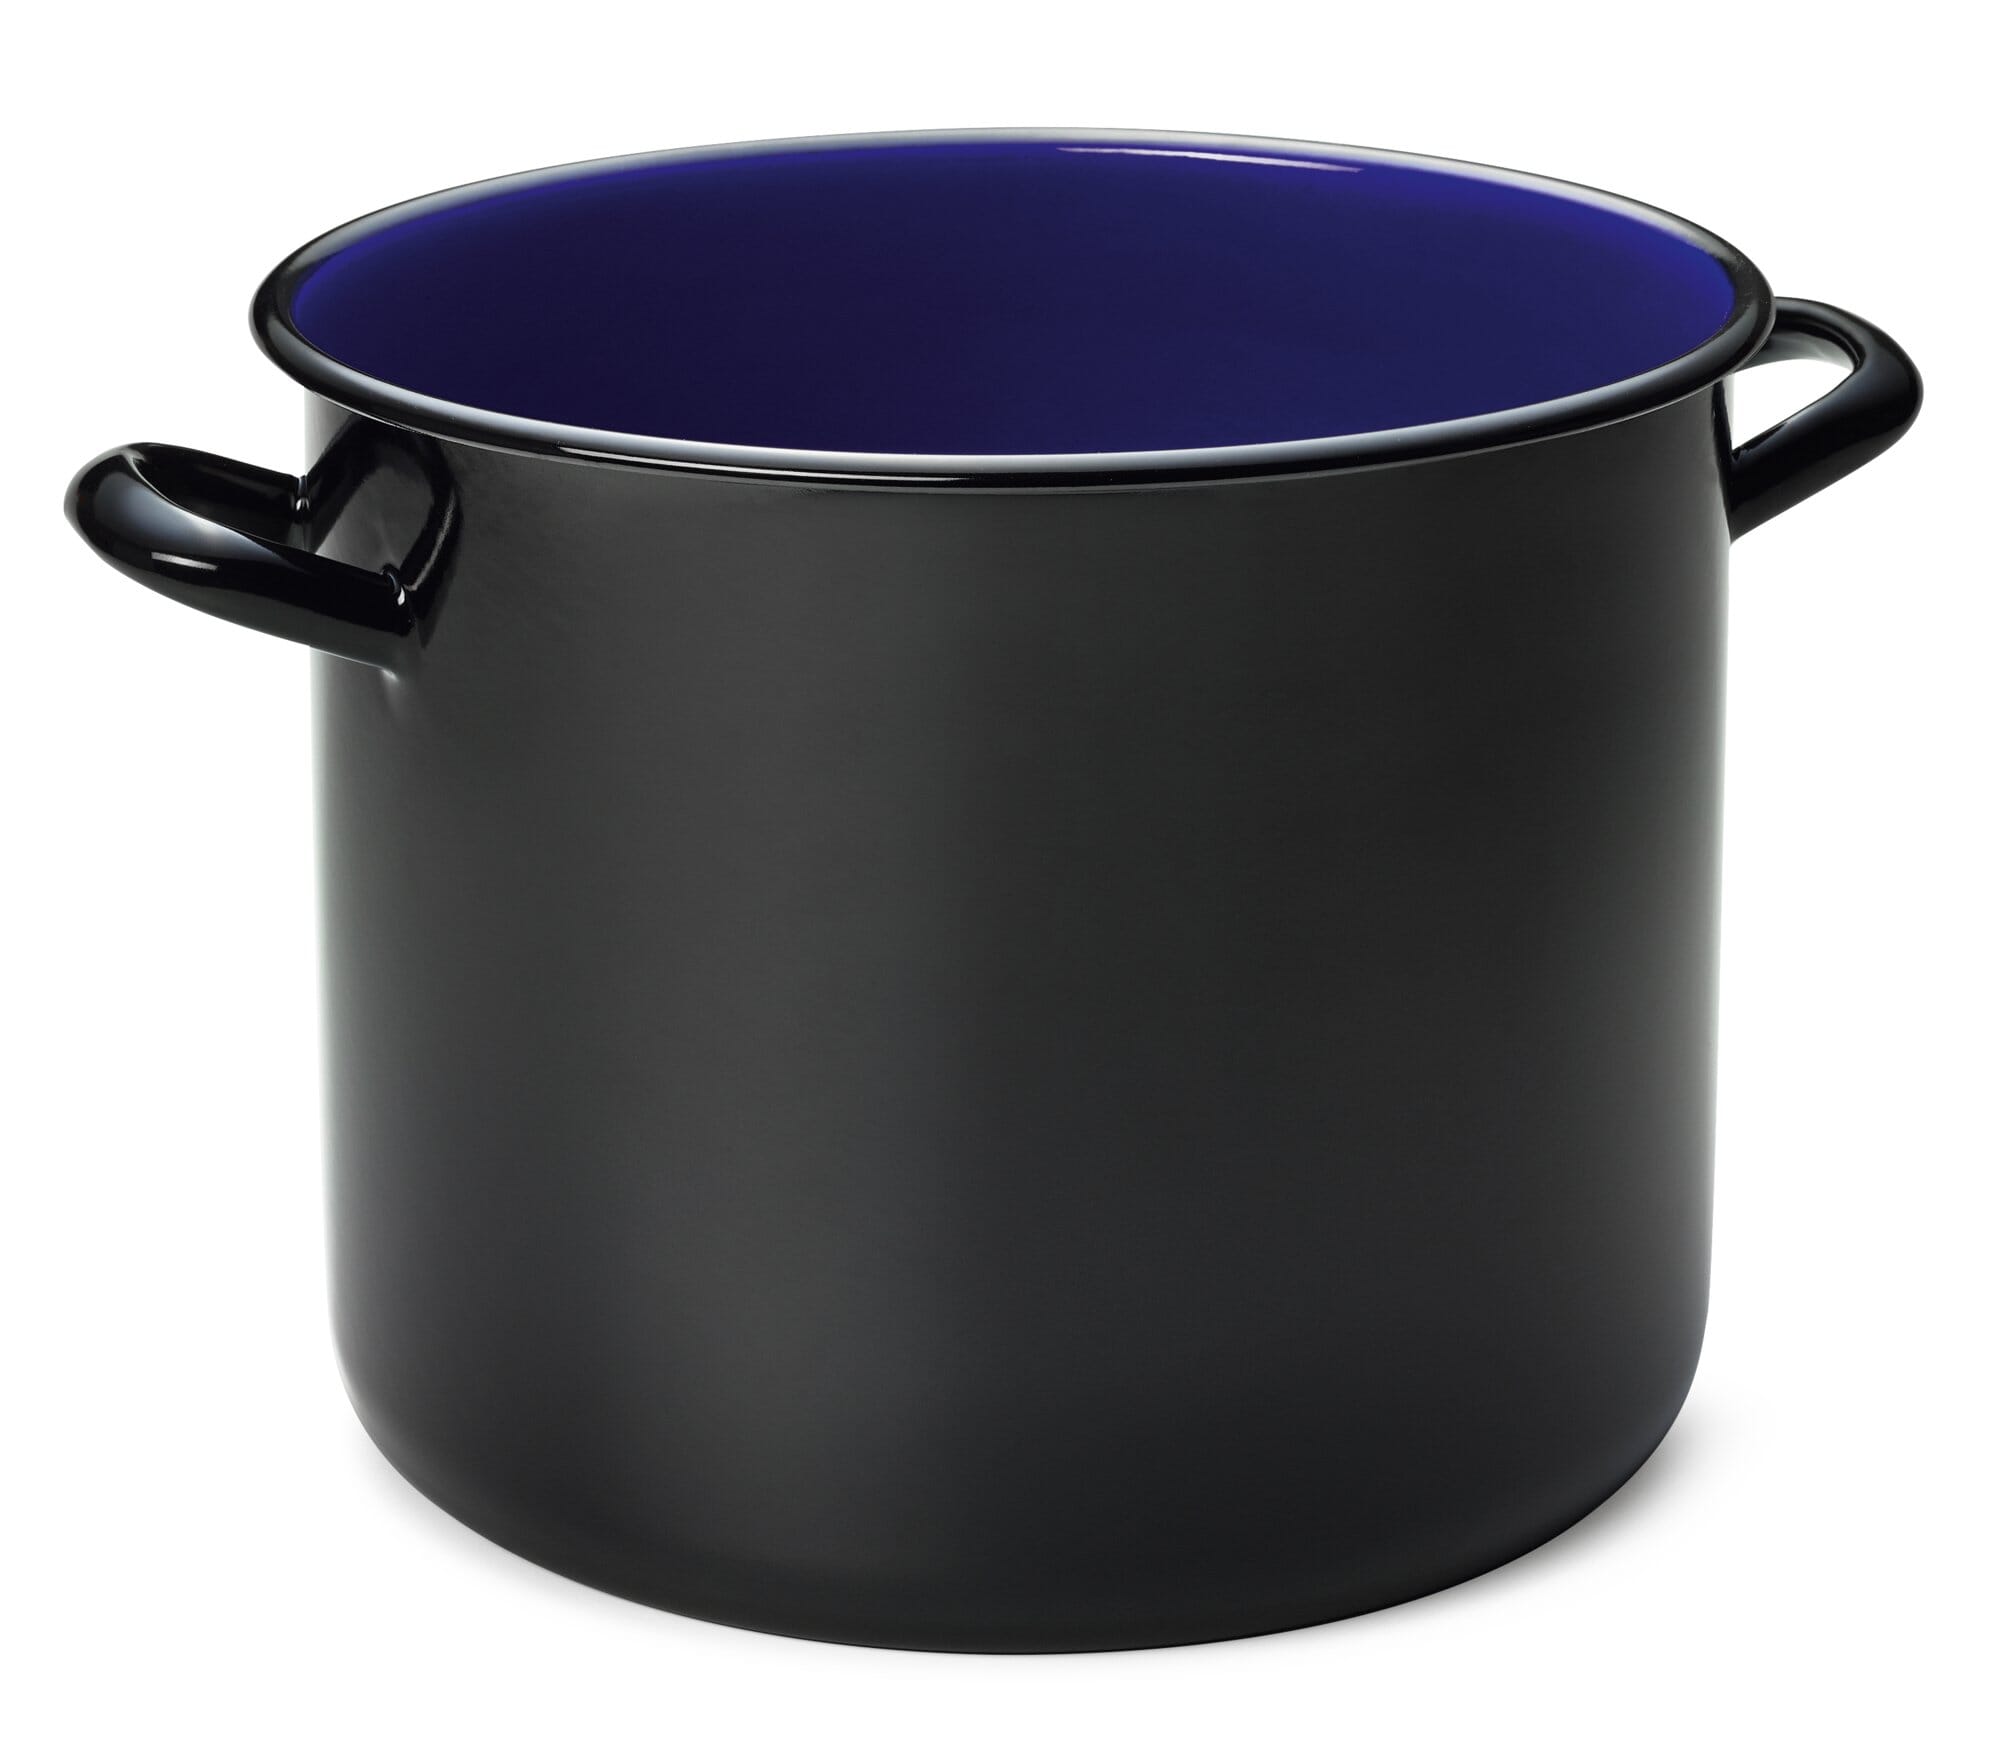 Riess Email Enamel Large Saucepan Pot With Glass Lid 24cm Induction 6,0L 